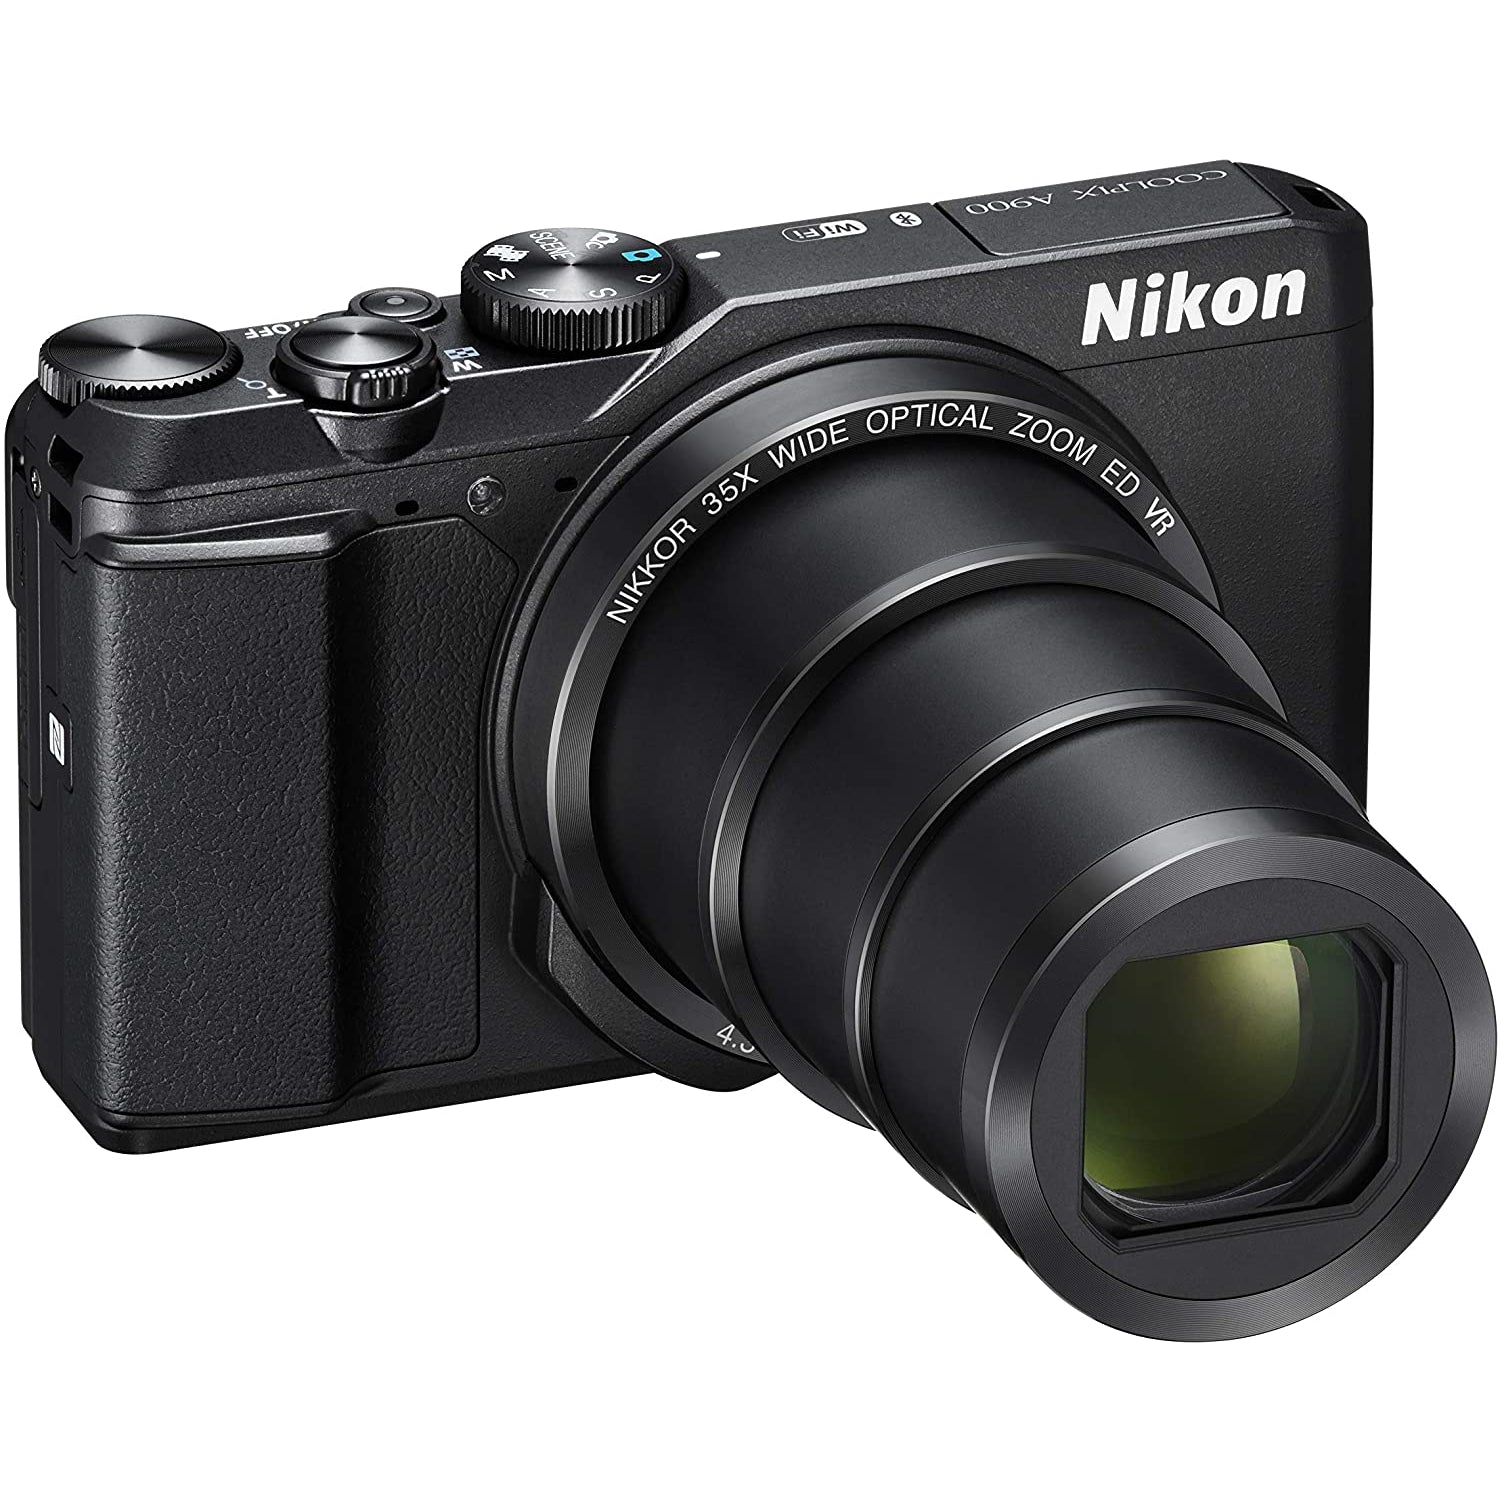 Nikon Coolpix A900 Compact System Camera - Black | Stock Must Go